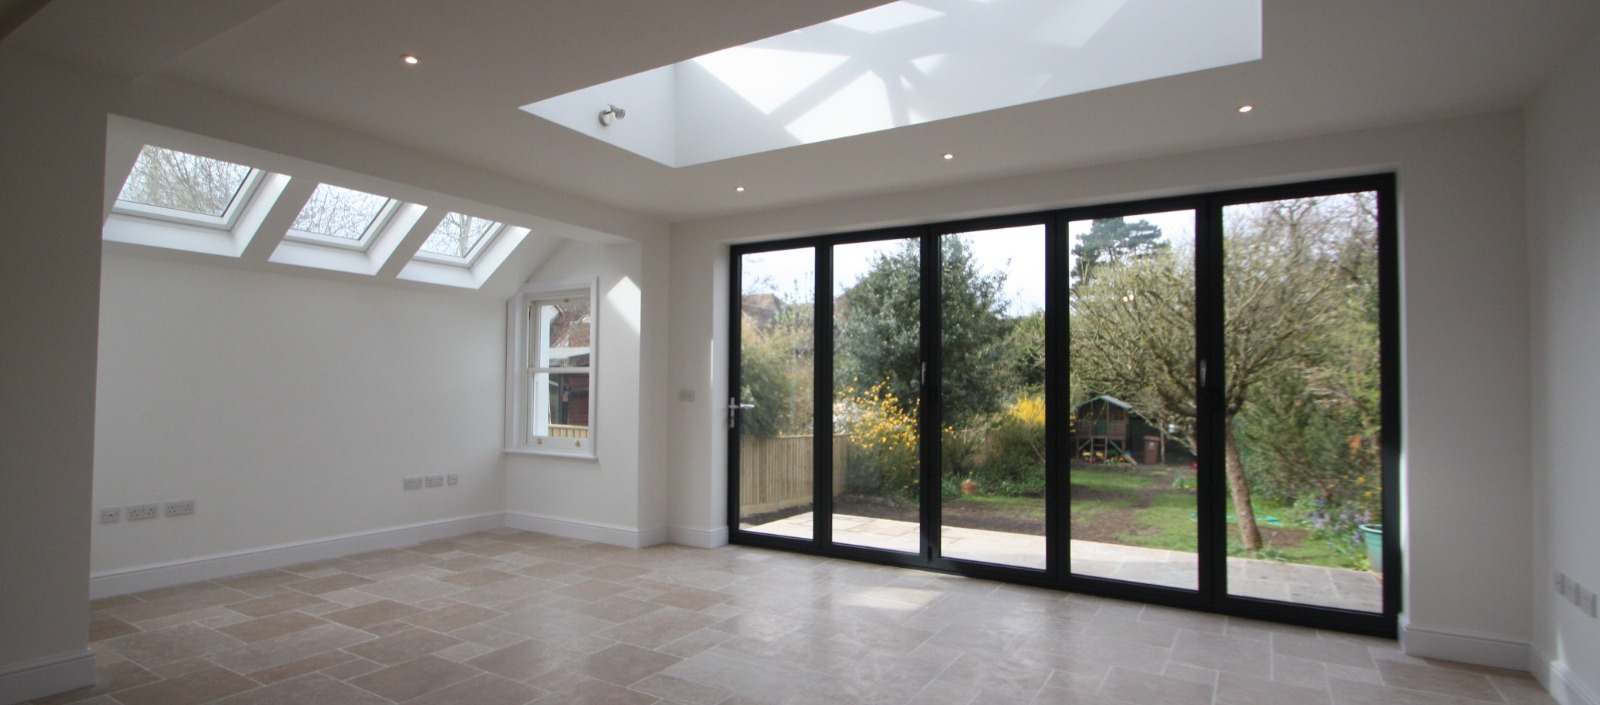 Open plan single storey and small side extension to a detached property in Headington